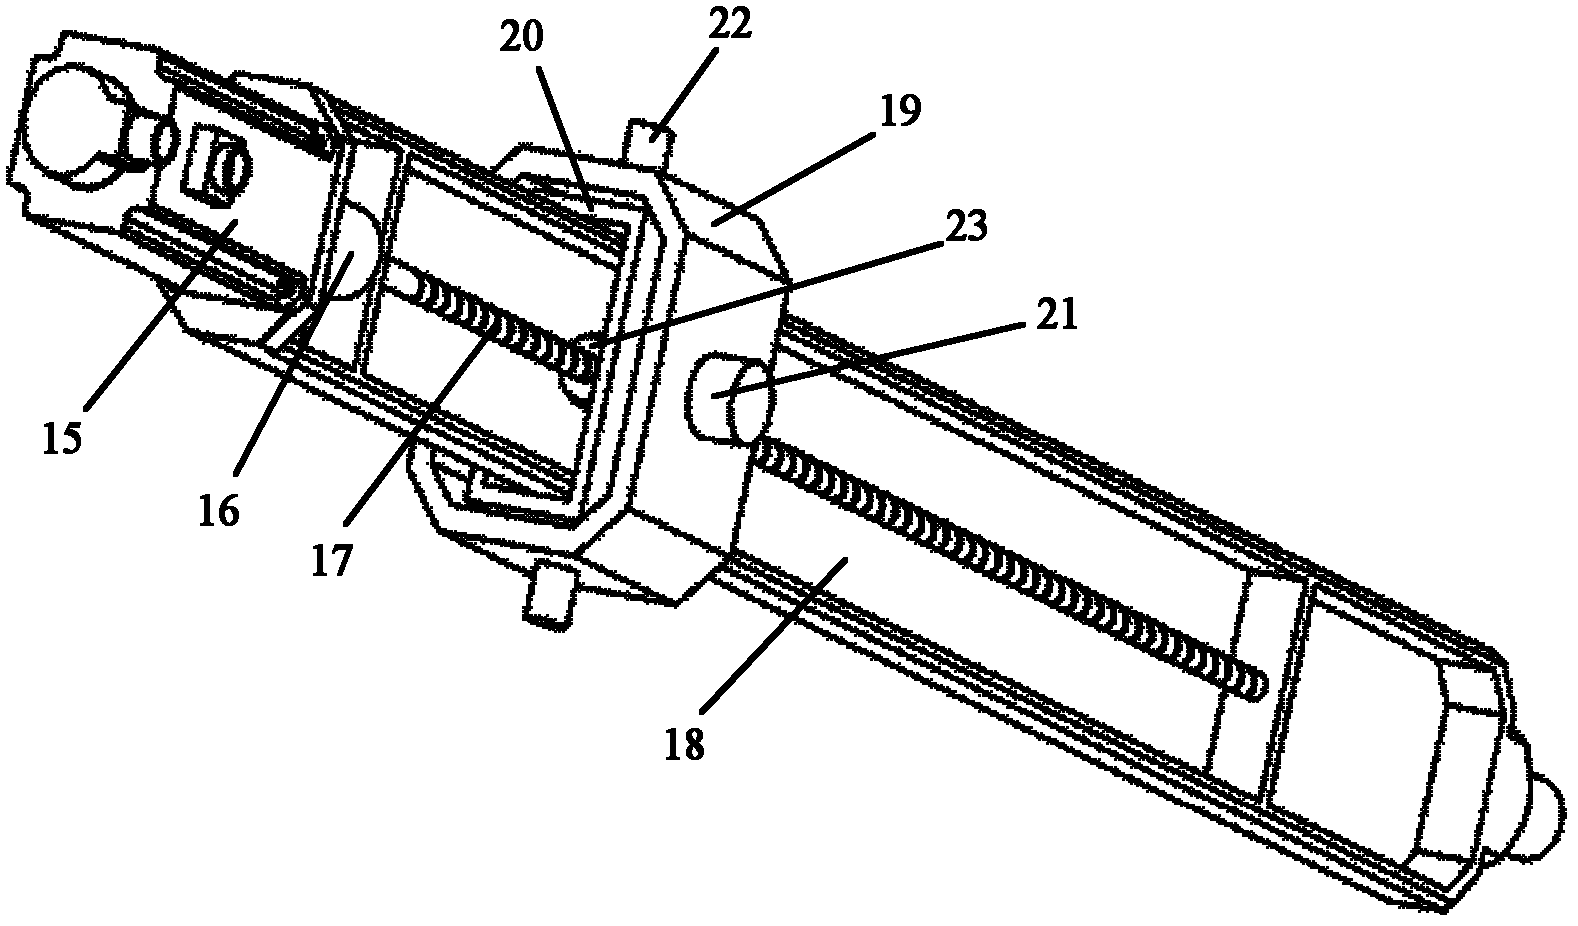 Power head capable of realizing five-shaft linkage operation